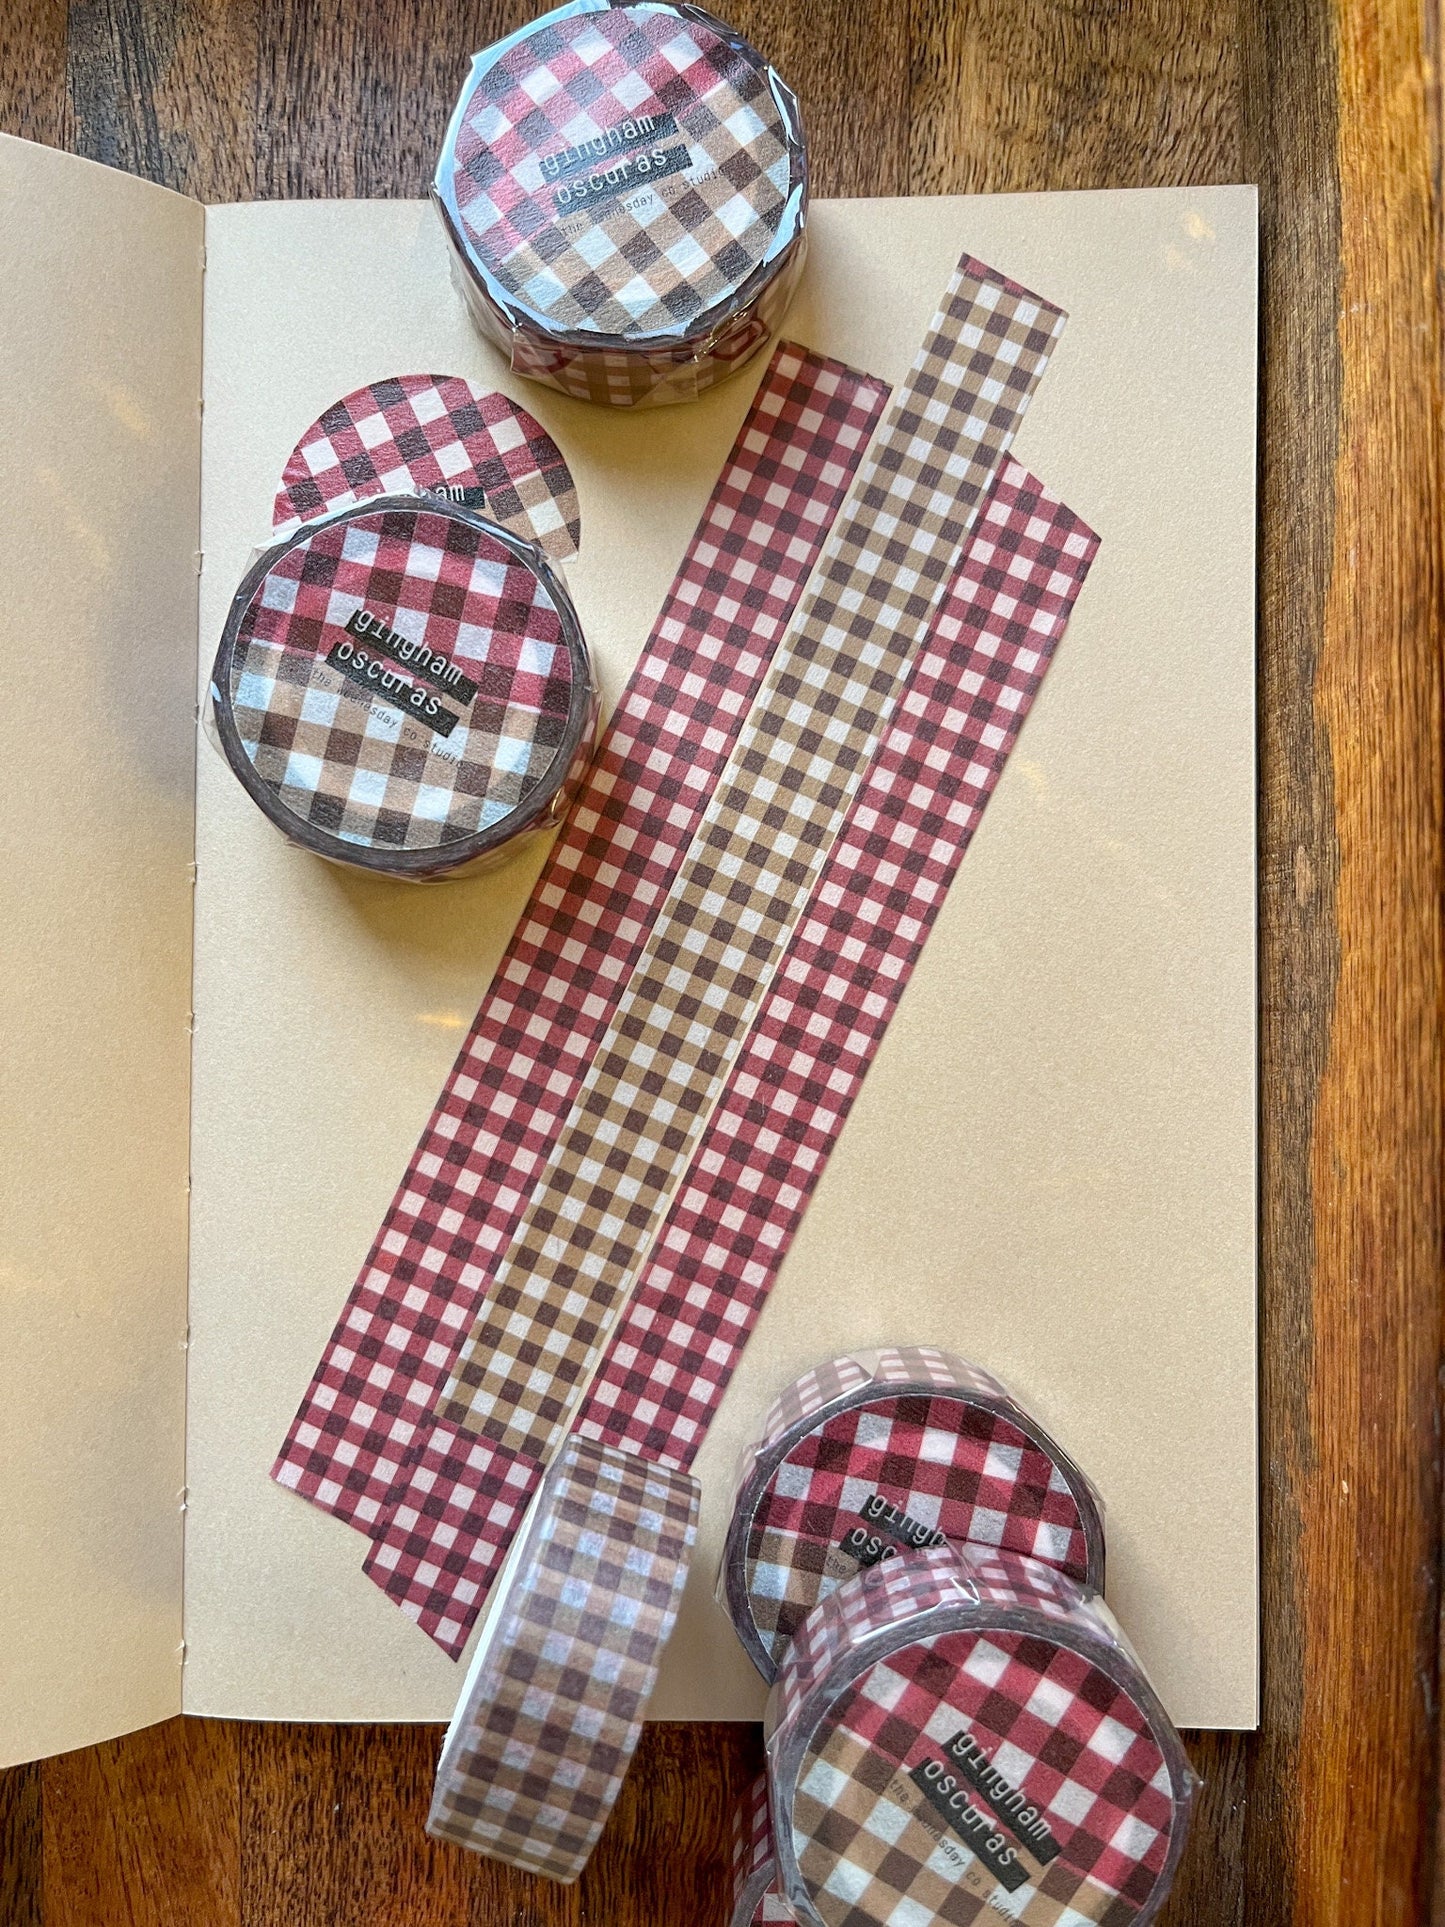 Gingham Oscuras Washi Tape